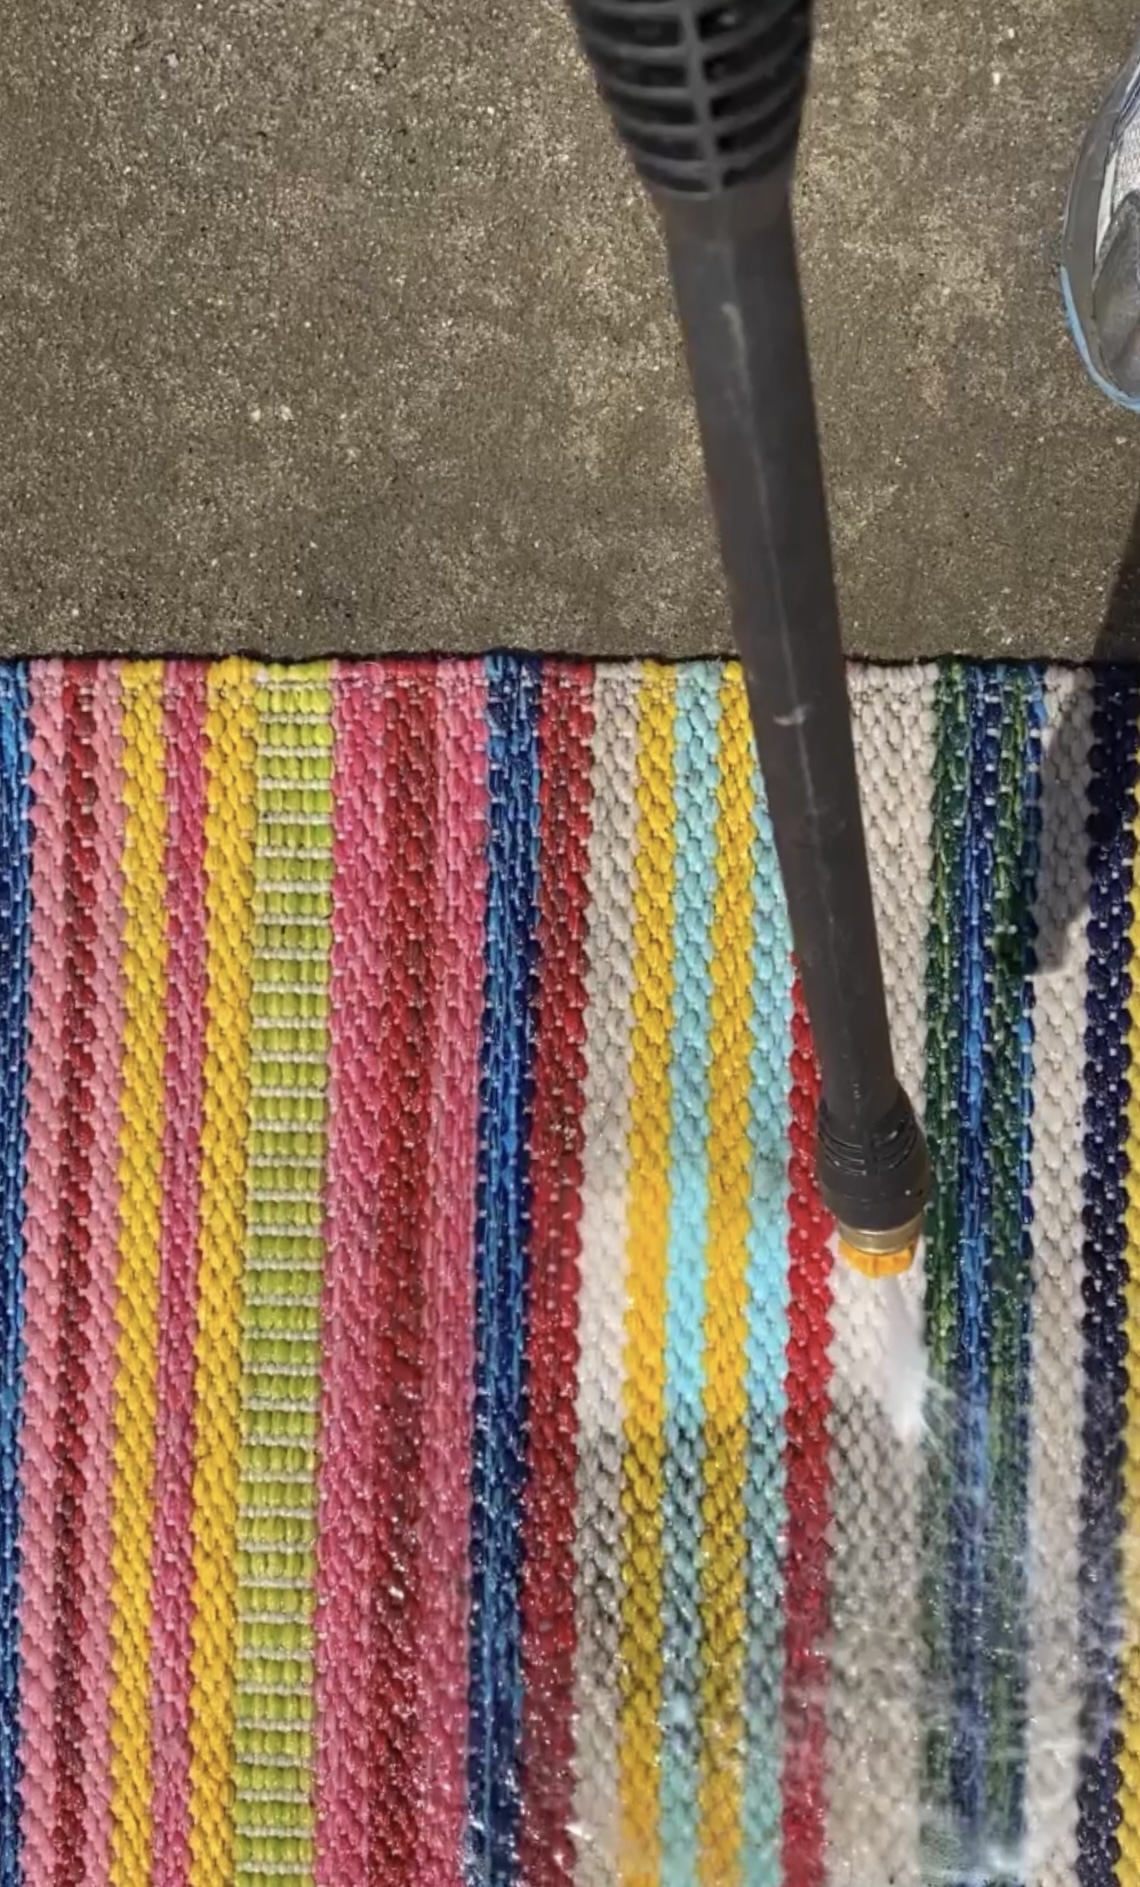 How to Keep Outdoor Rugs from Blowing Away